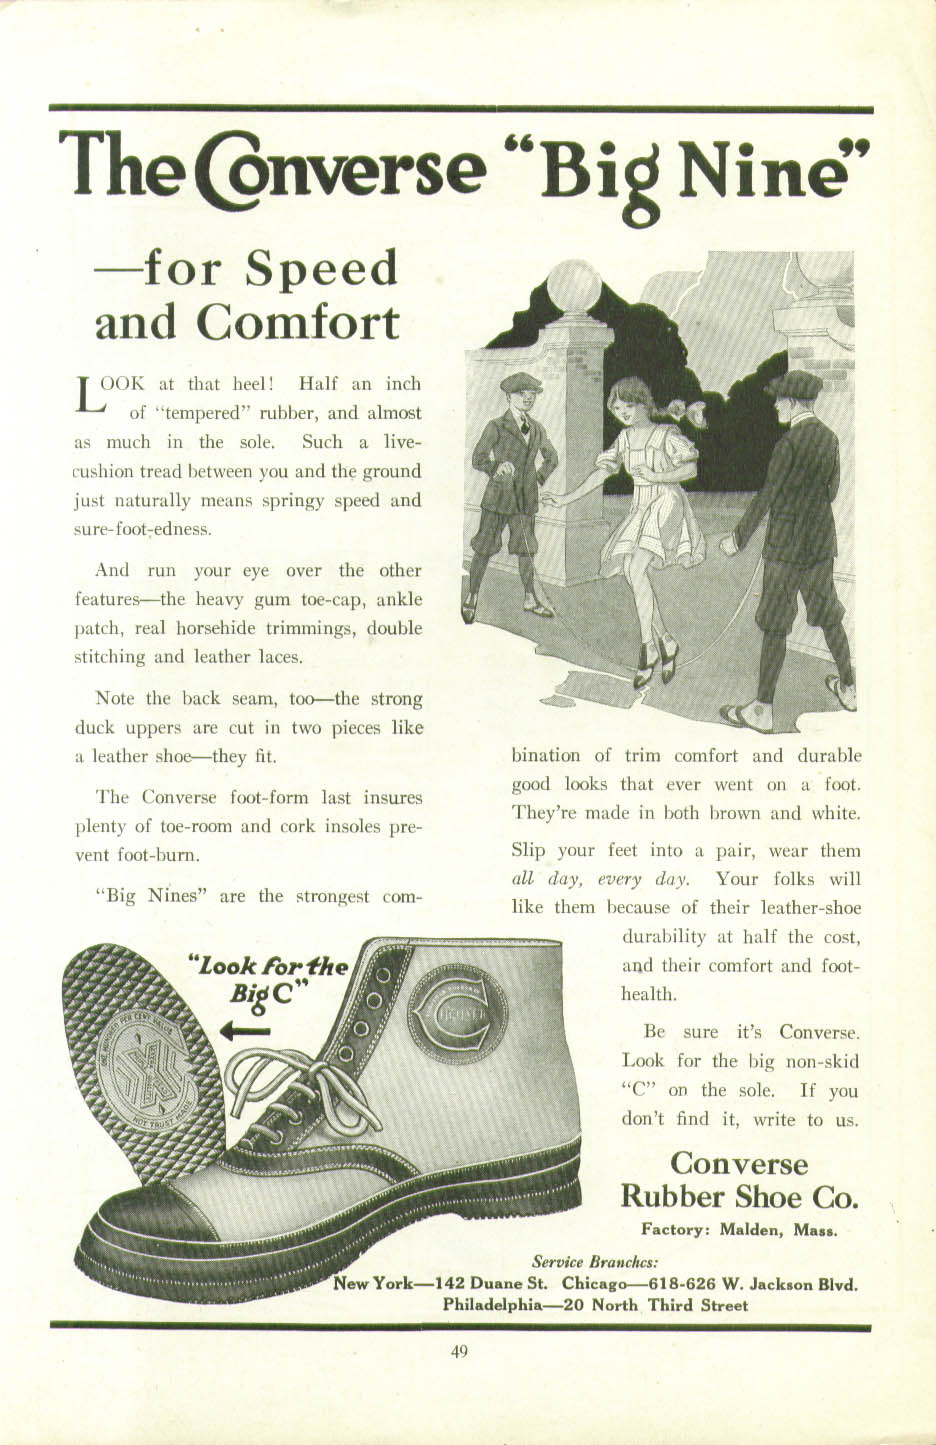 The Converse Big Nine Athletic Shoe for Speed & Comfort ad 1920